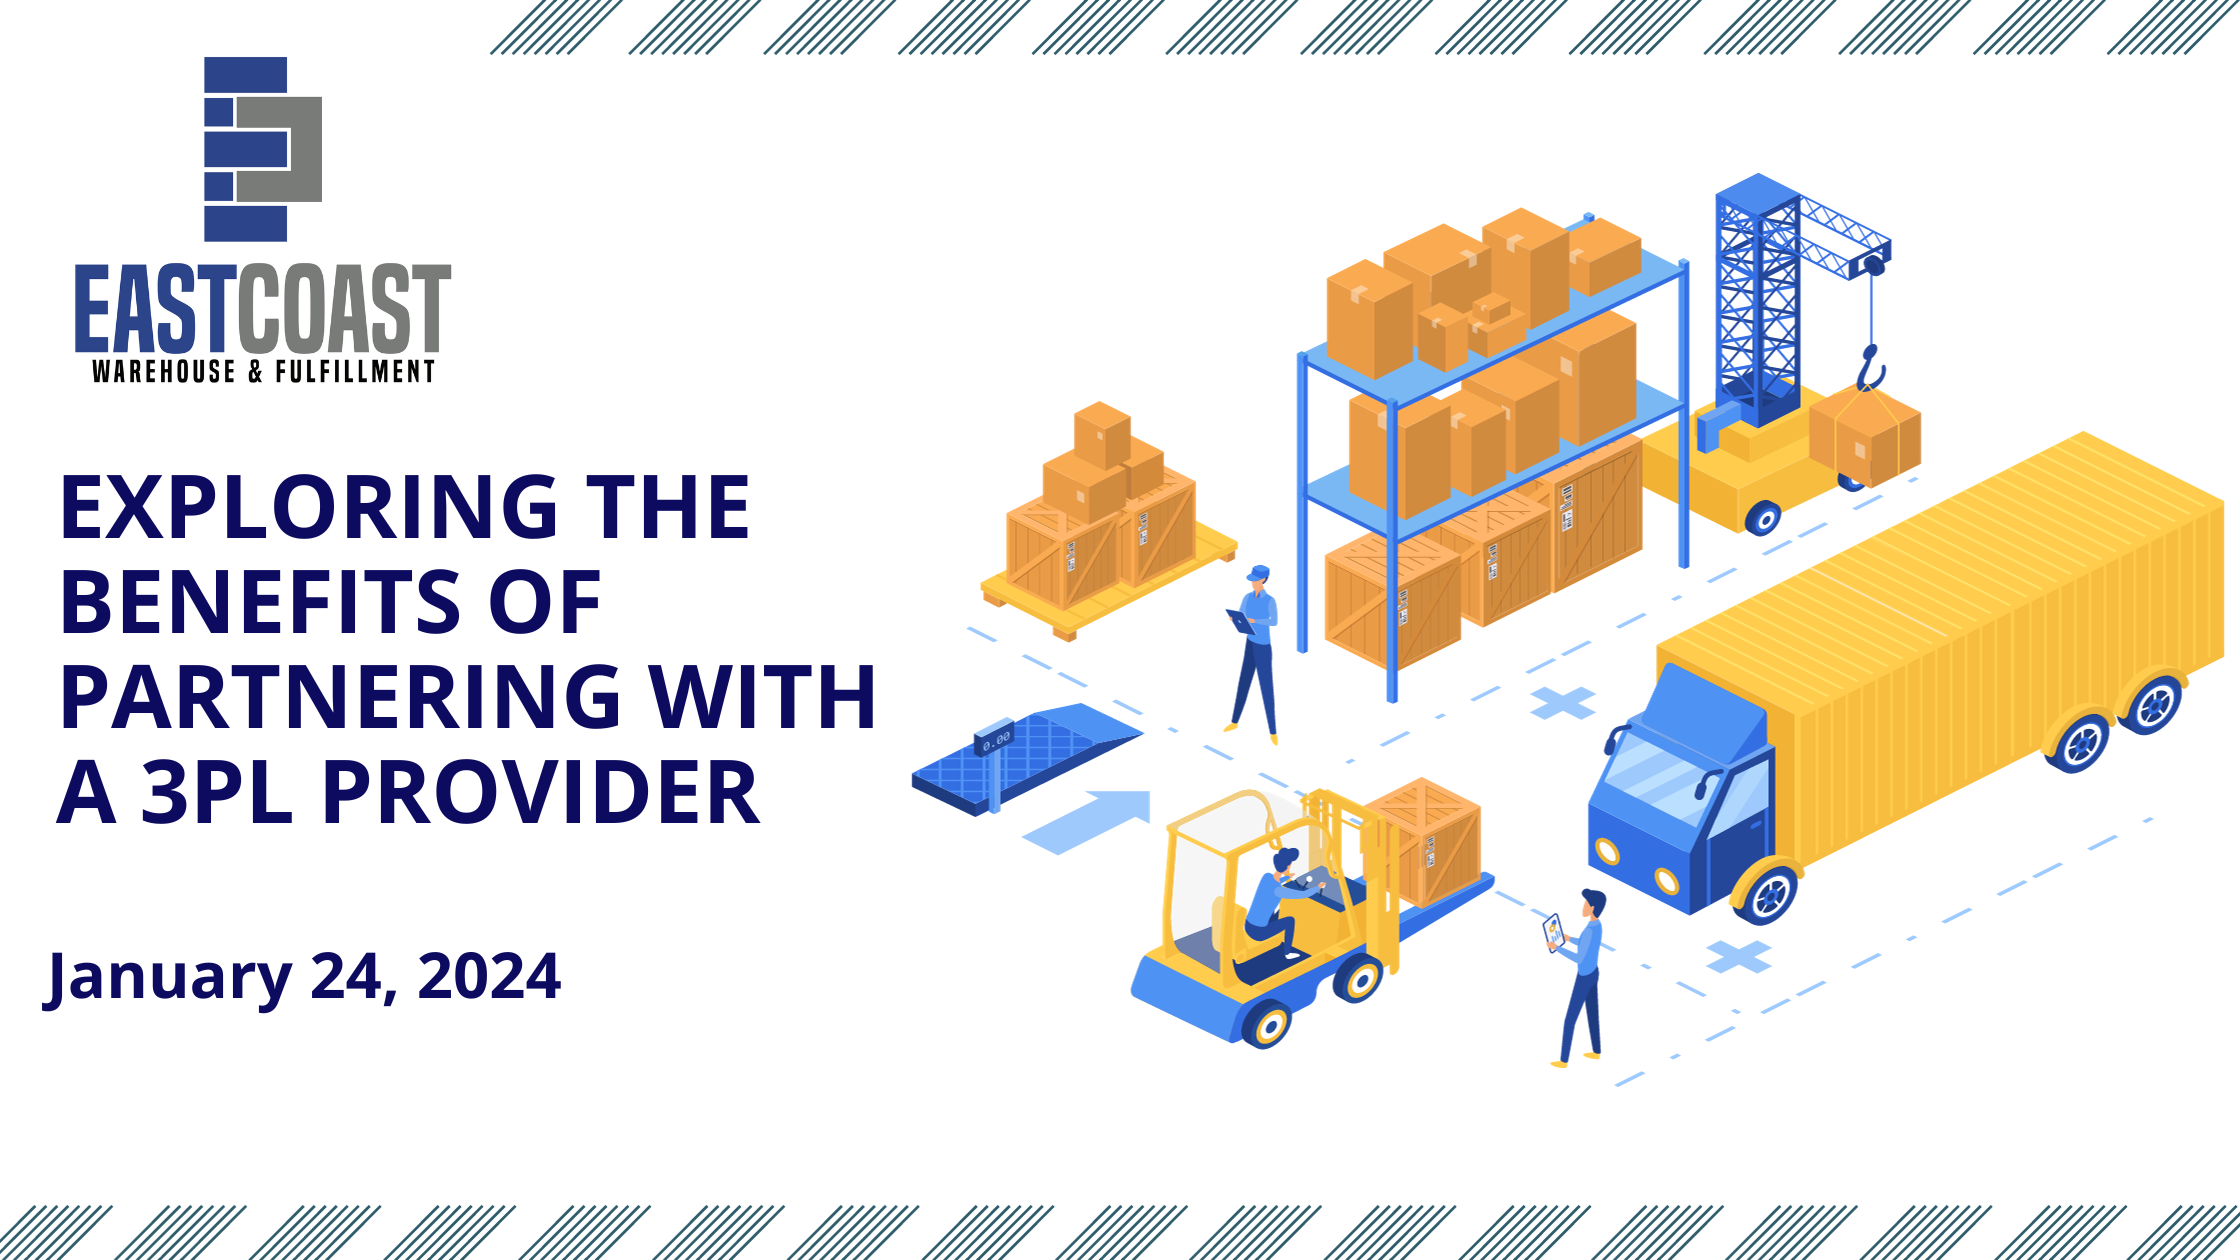 Exploring the Benefits of Partnering with a 3PL Provider